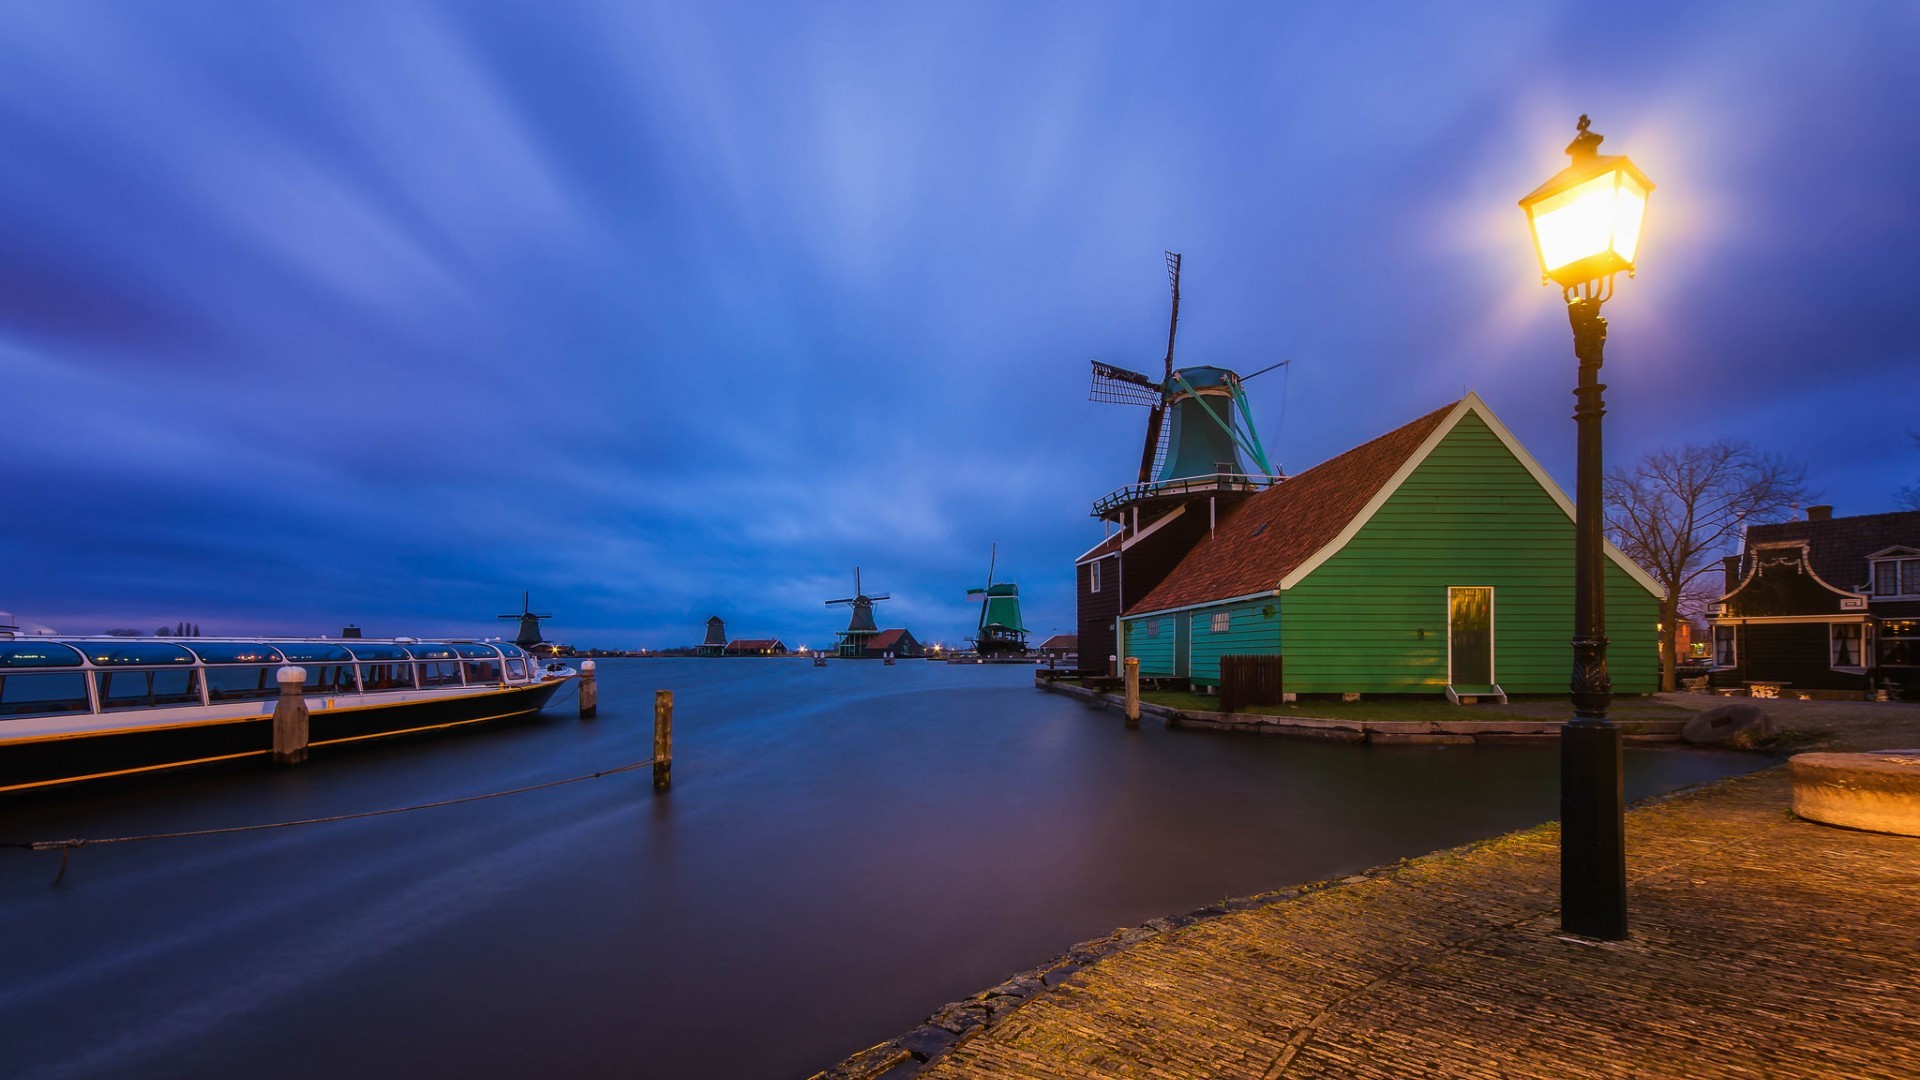 General 1920x1080 evening lights house town clouds Netherlands windmill street light lamp water long exposure boat